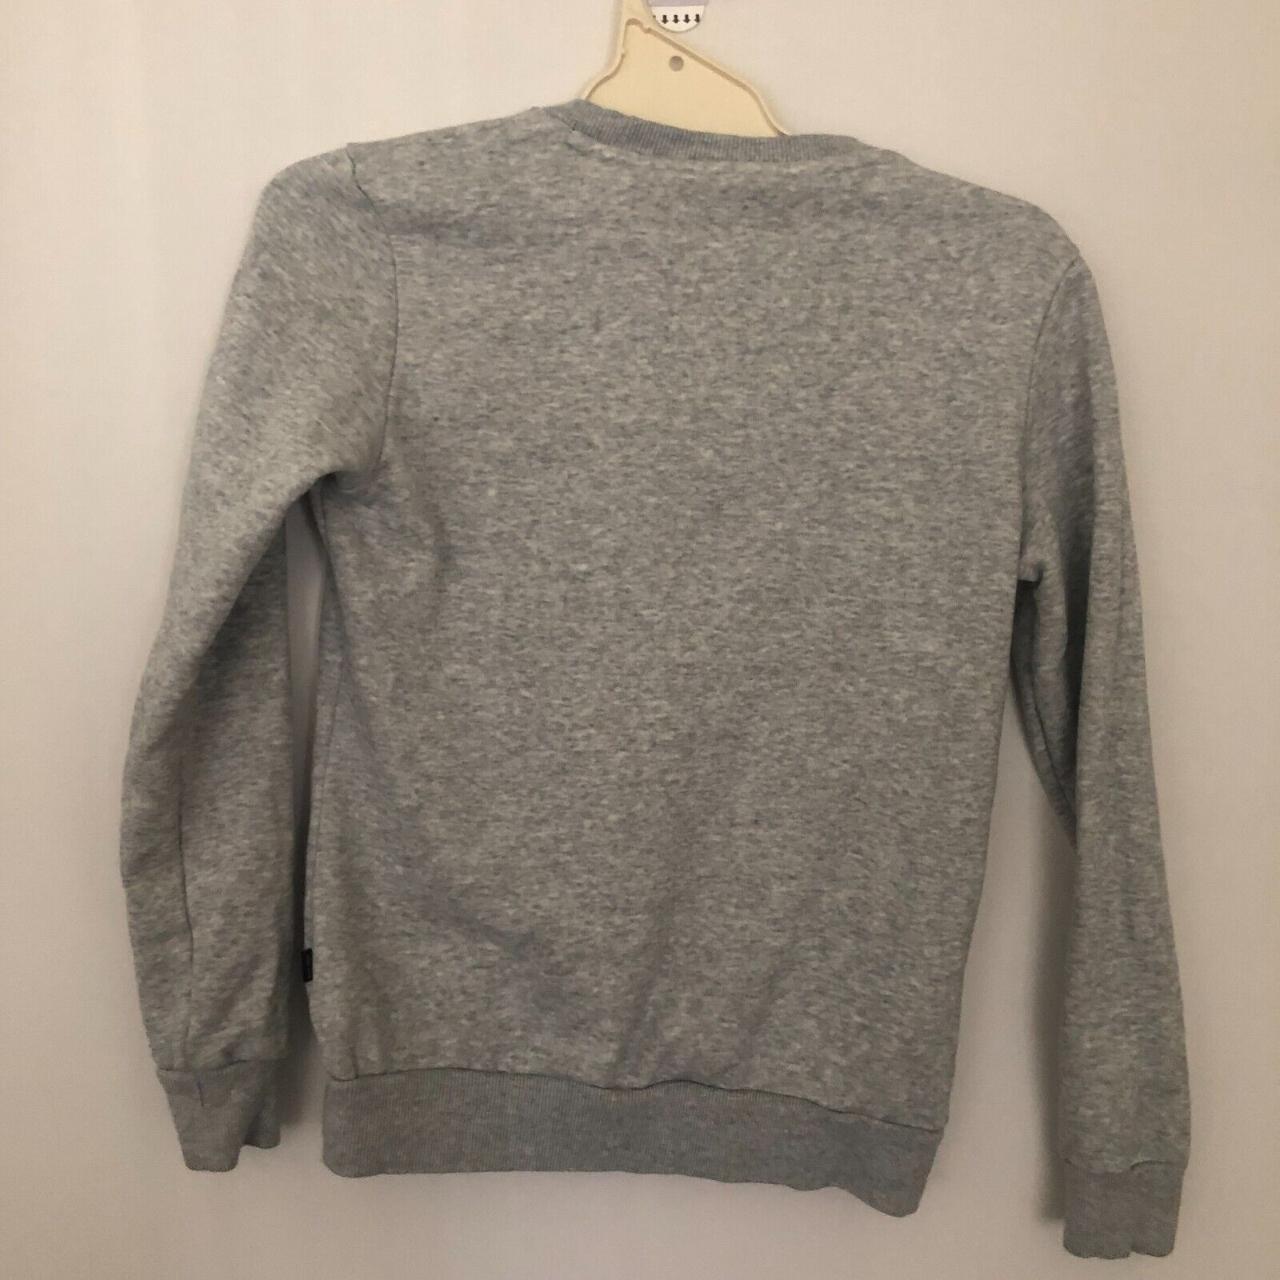 puma jumper pull over grey size extra small Over... - Depop